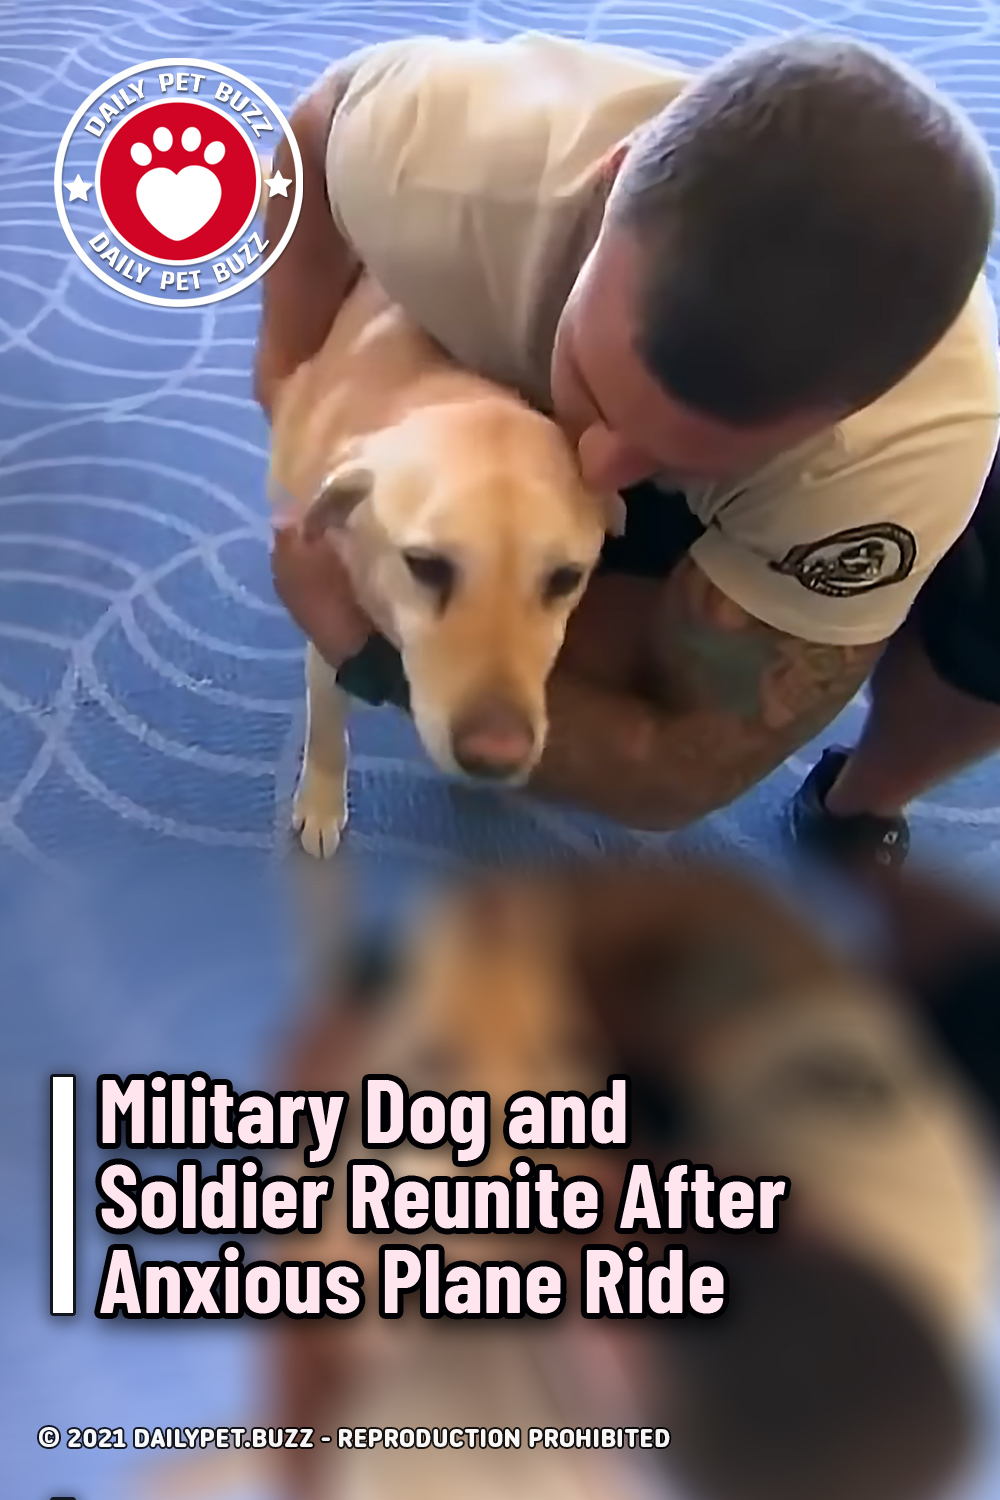 Military Dog and Soldier Reunite After Anxious Plane Ride